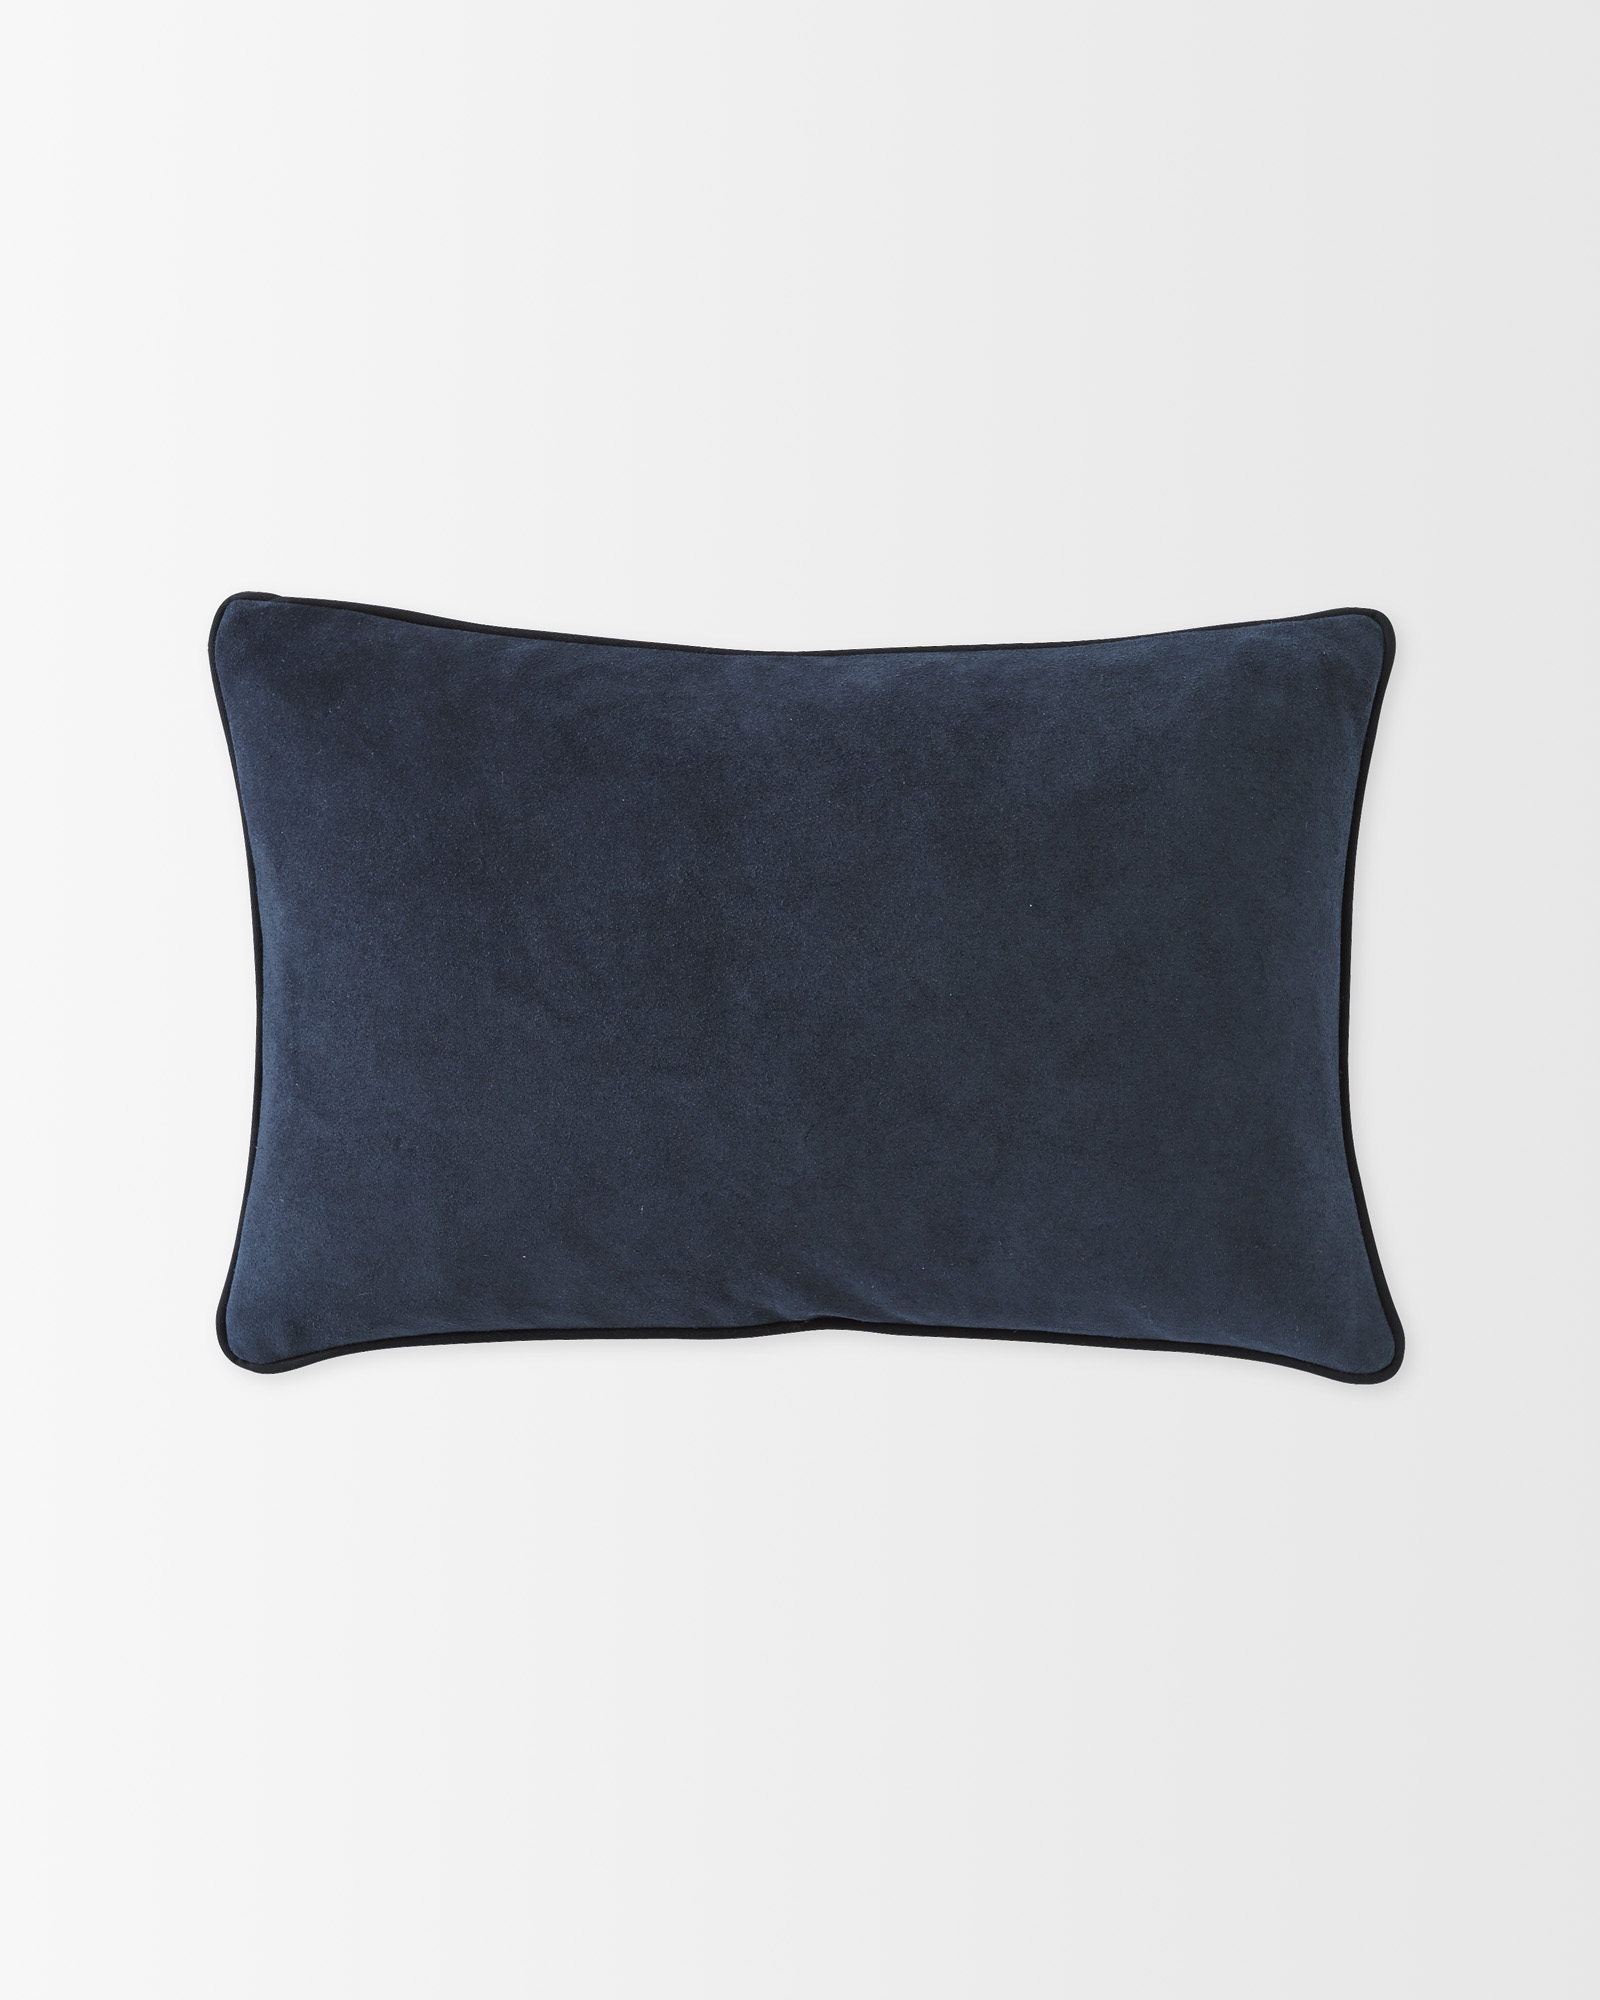 Suede Lumbar Pillow Cover -Navy - 12 " x 18" - Insert sold separately - Image 0